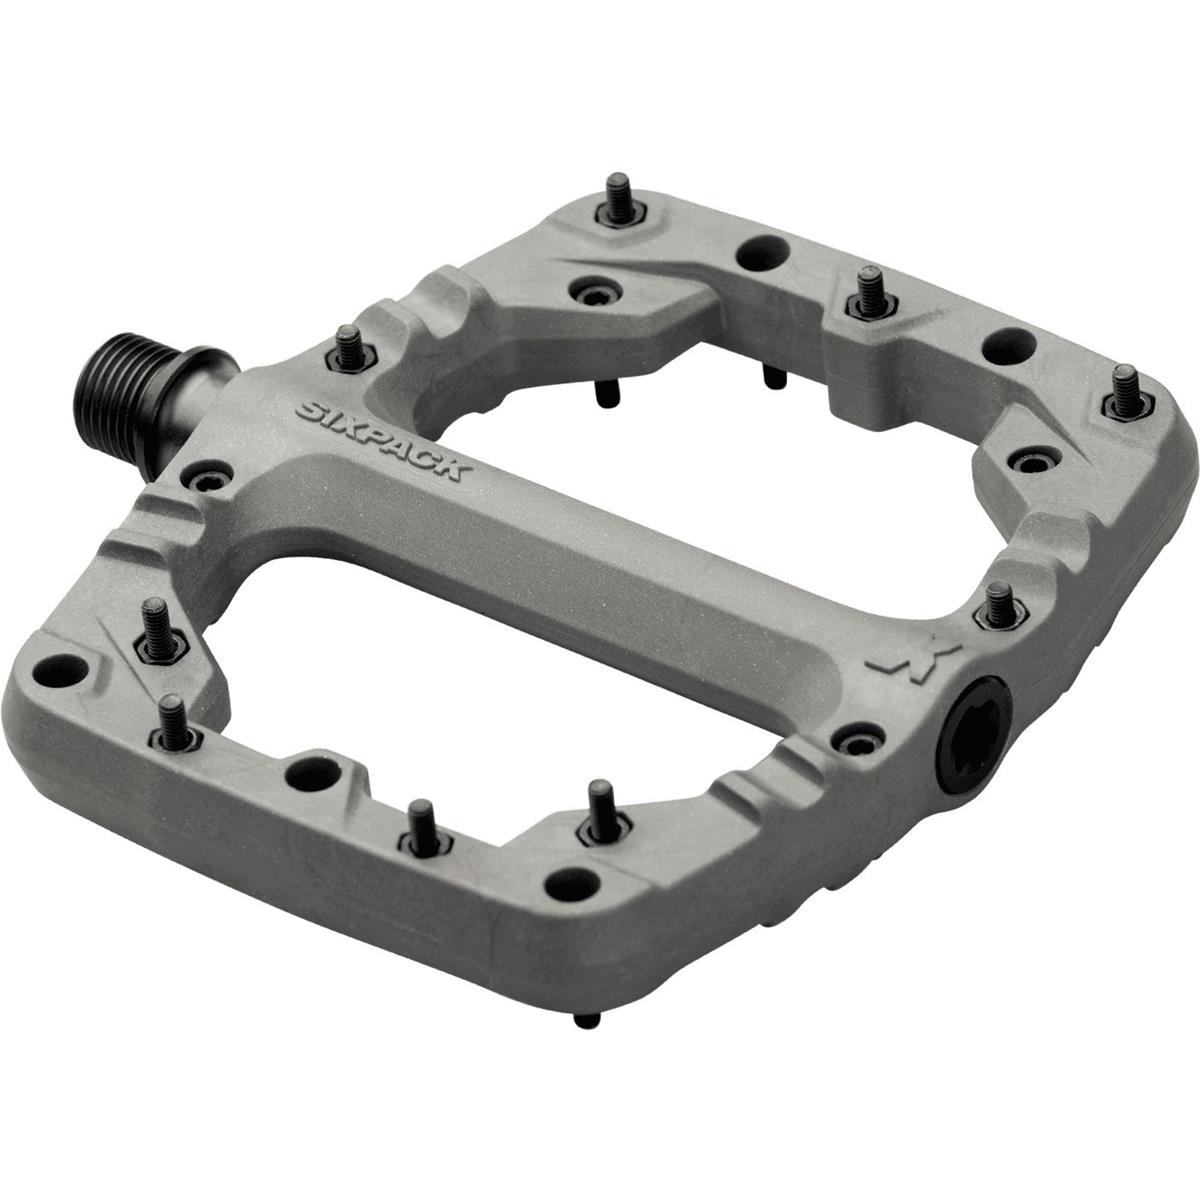 Sixpack Pedals Kamikaze PA Steel Grey, 1 Pair